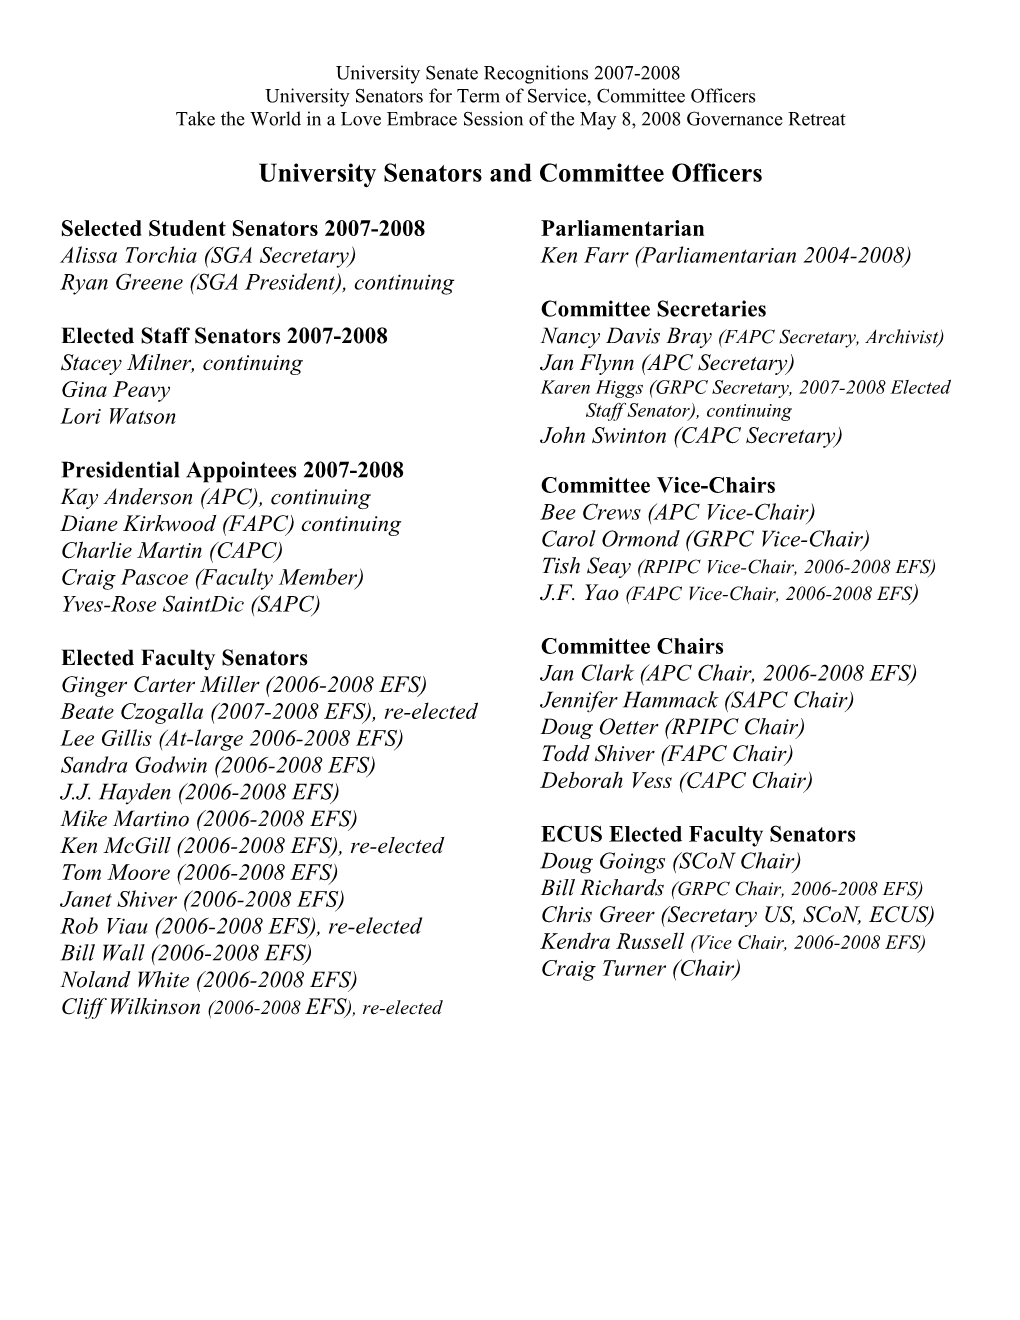 University Senators for Term of Service, Committee Officers